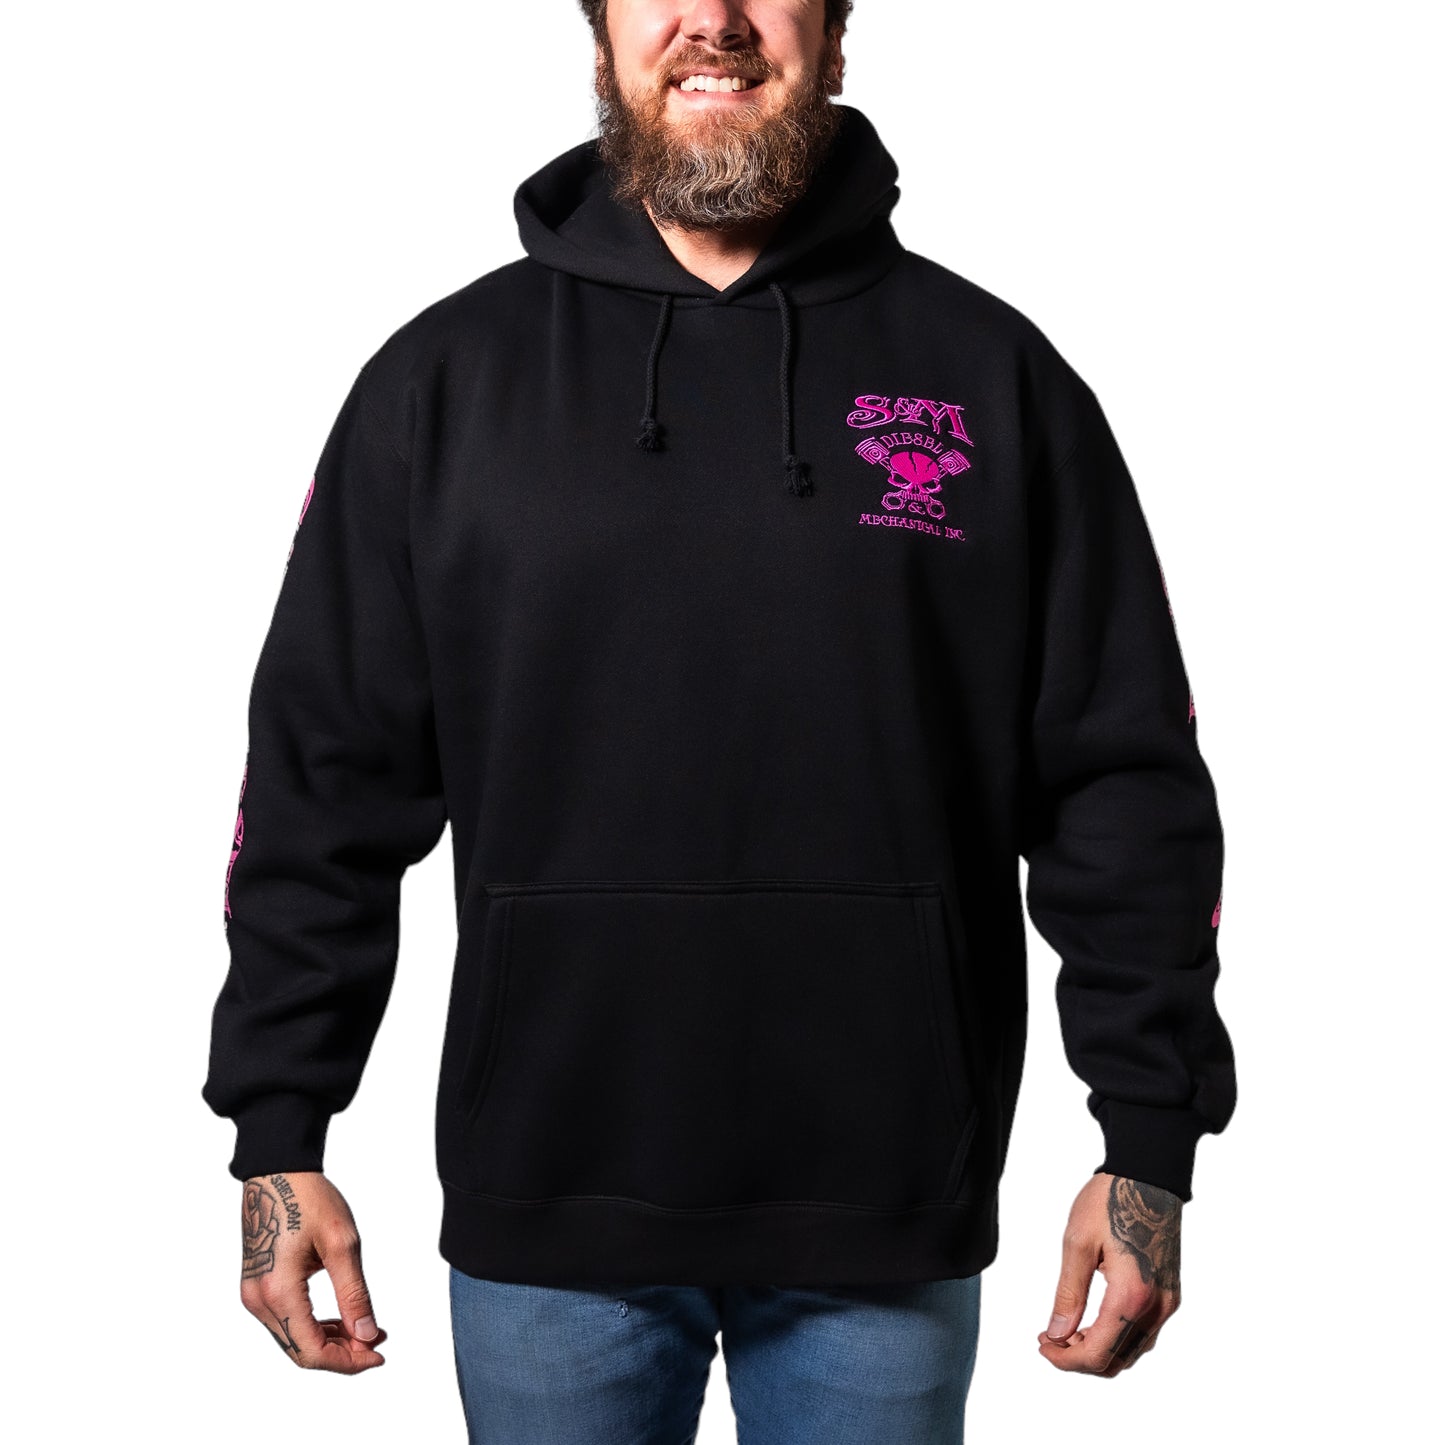 S&M Diesel pullover logo hoodie - 8 color options avail